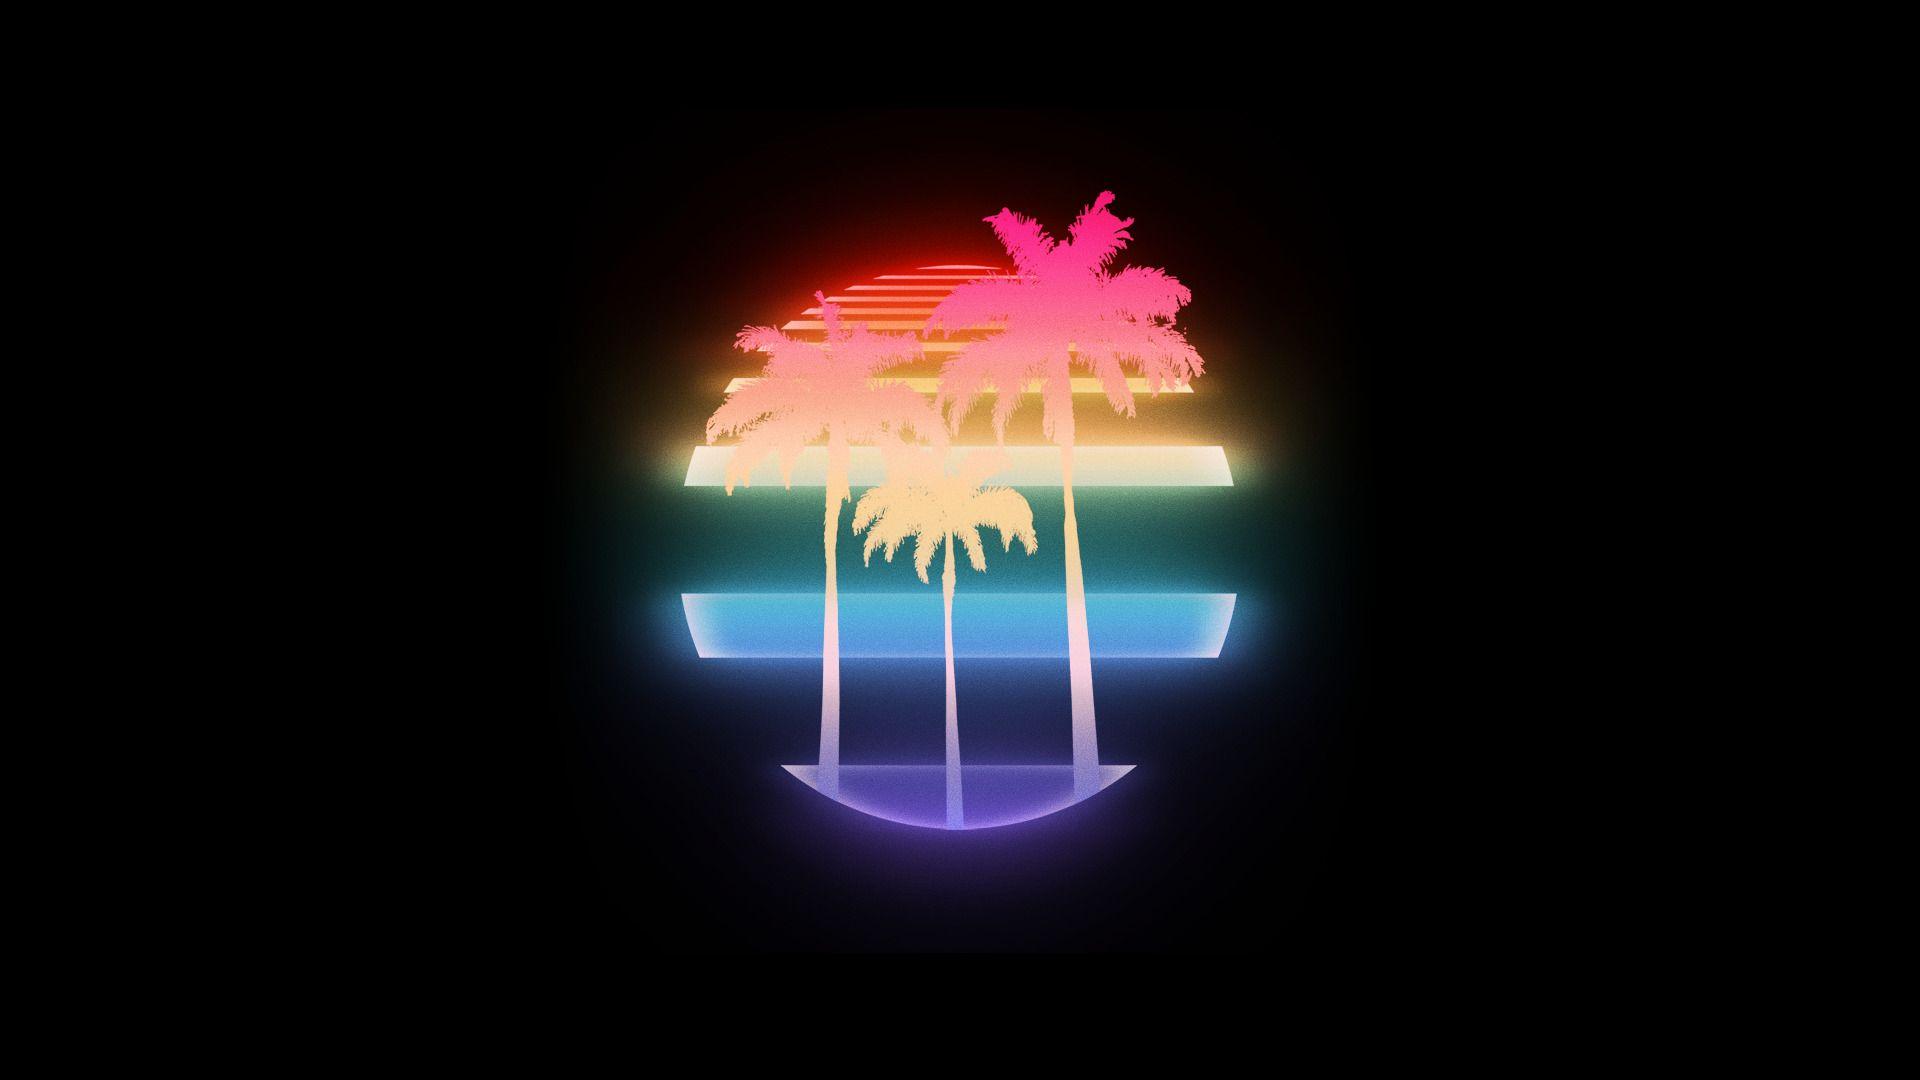 Download HD Wallpaper Of 479278 VHS, Palm_trees, 1980s, New_Retro_Wave, Retro_style, Vintage, Sunset, Vaporwave. Vaporwave Wallpaper, Retro Waves, City Wallpaper